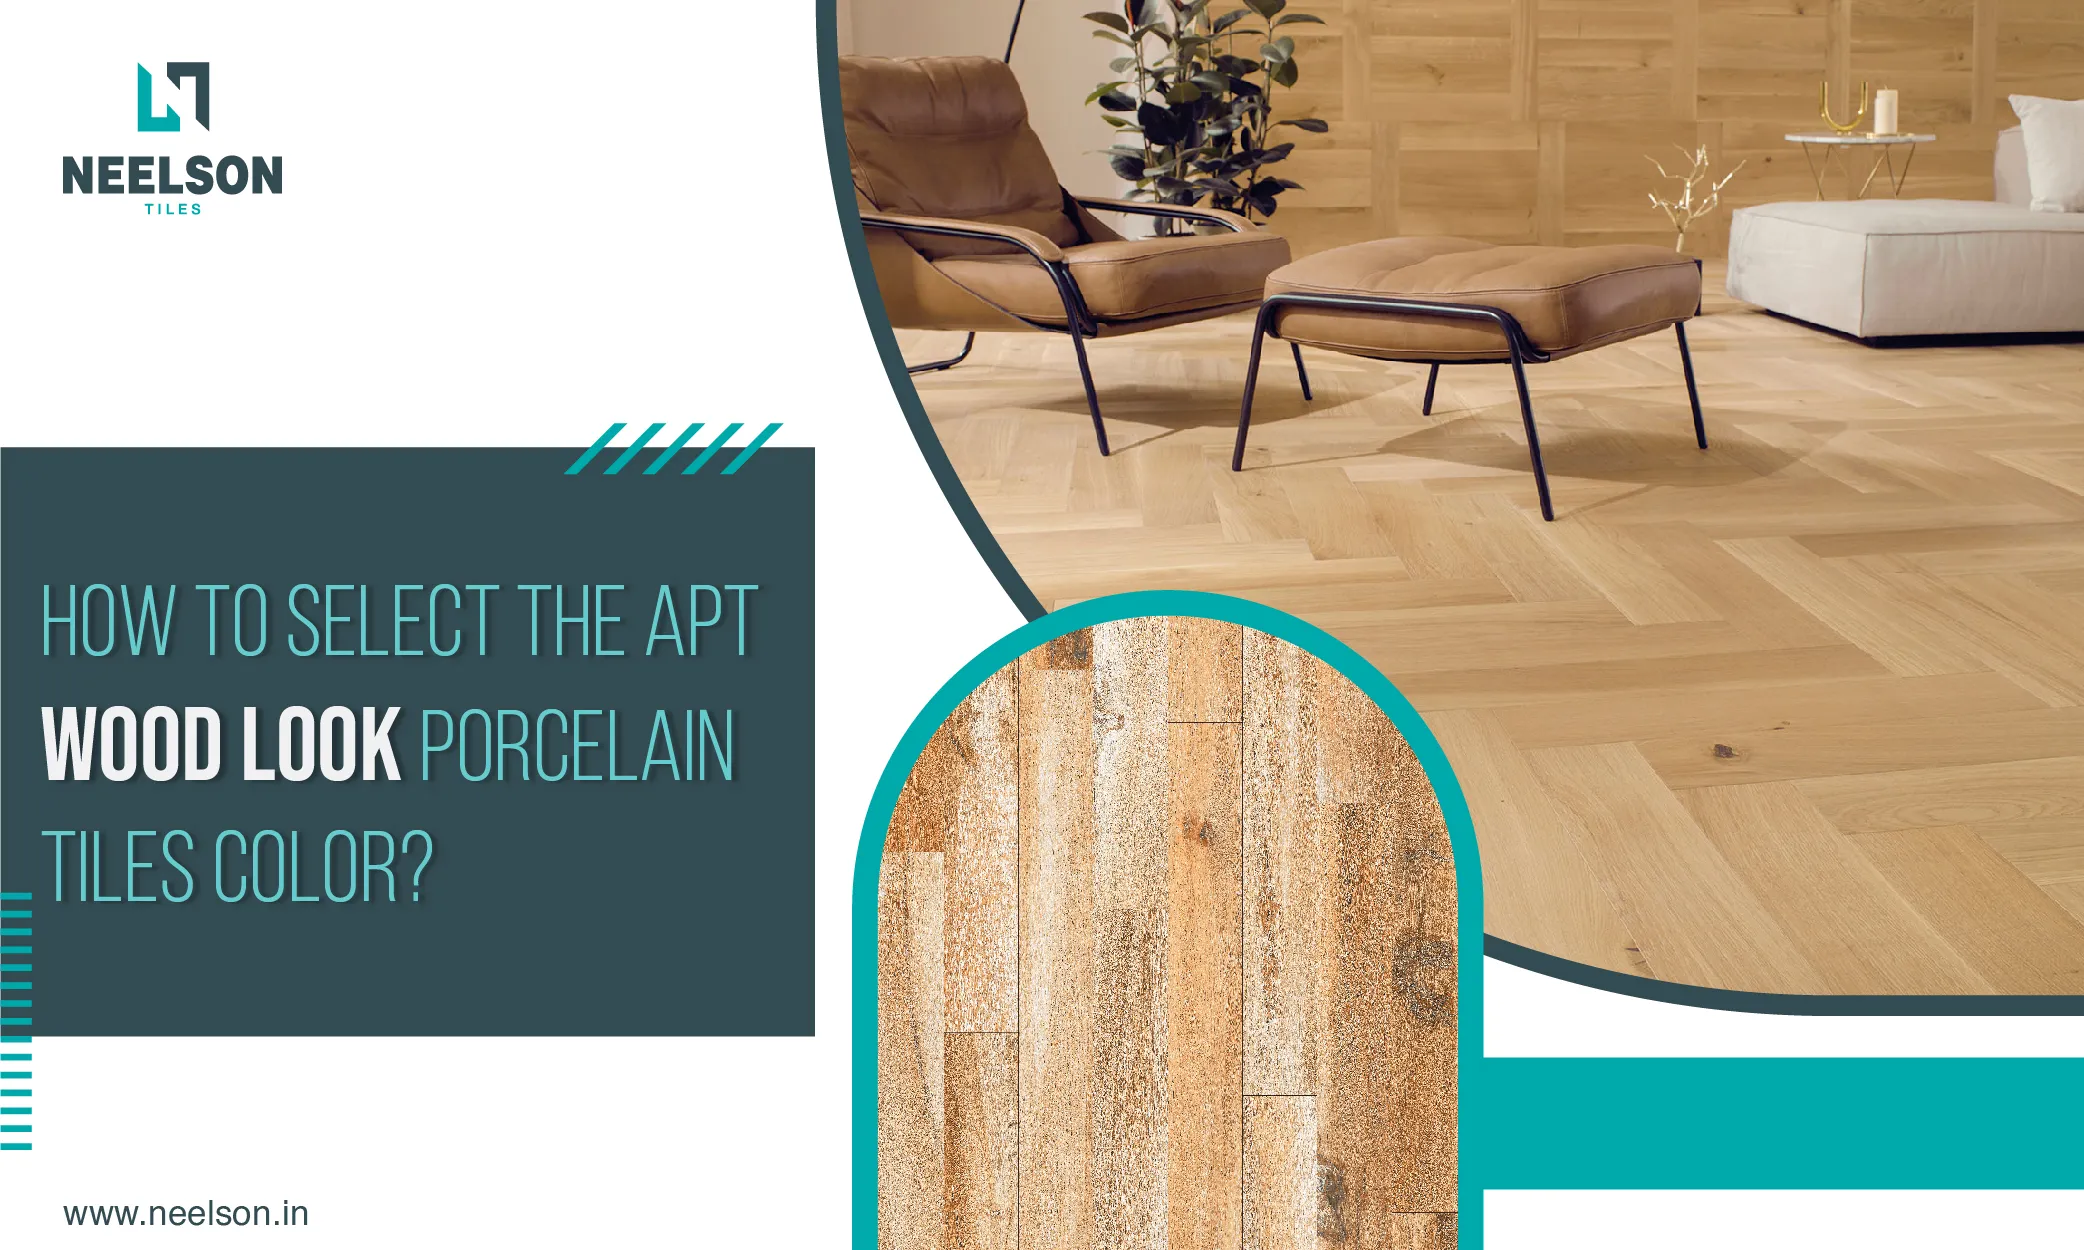 How to Select the apt Wood look Porcelain tiles color?